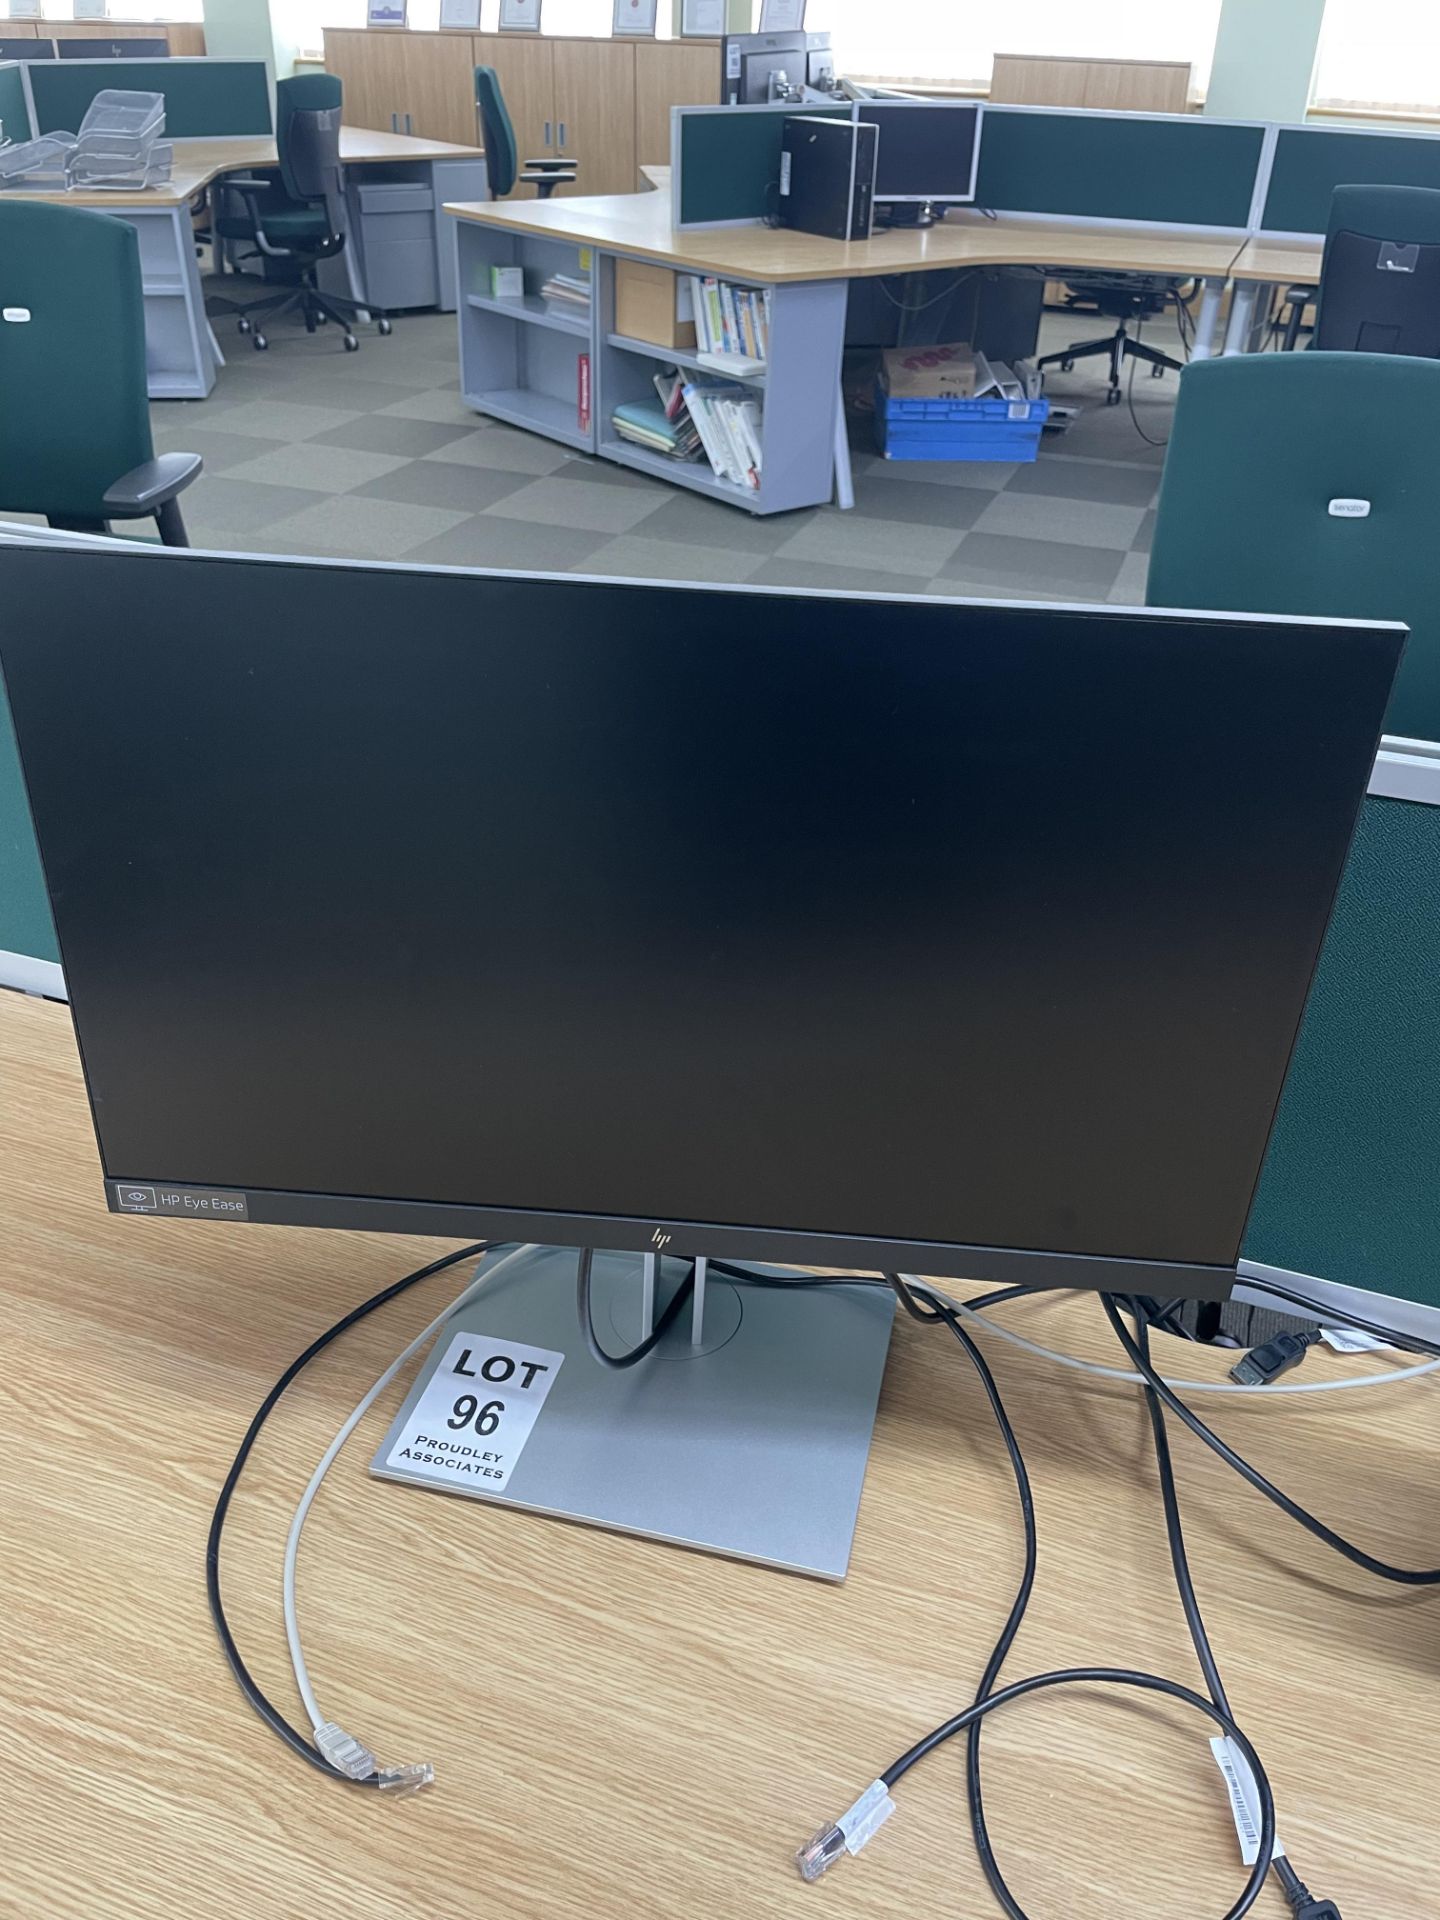 HP E24 G4 FHD 24" screen with adjustable height stand